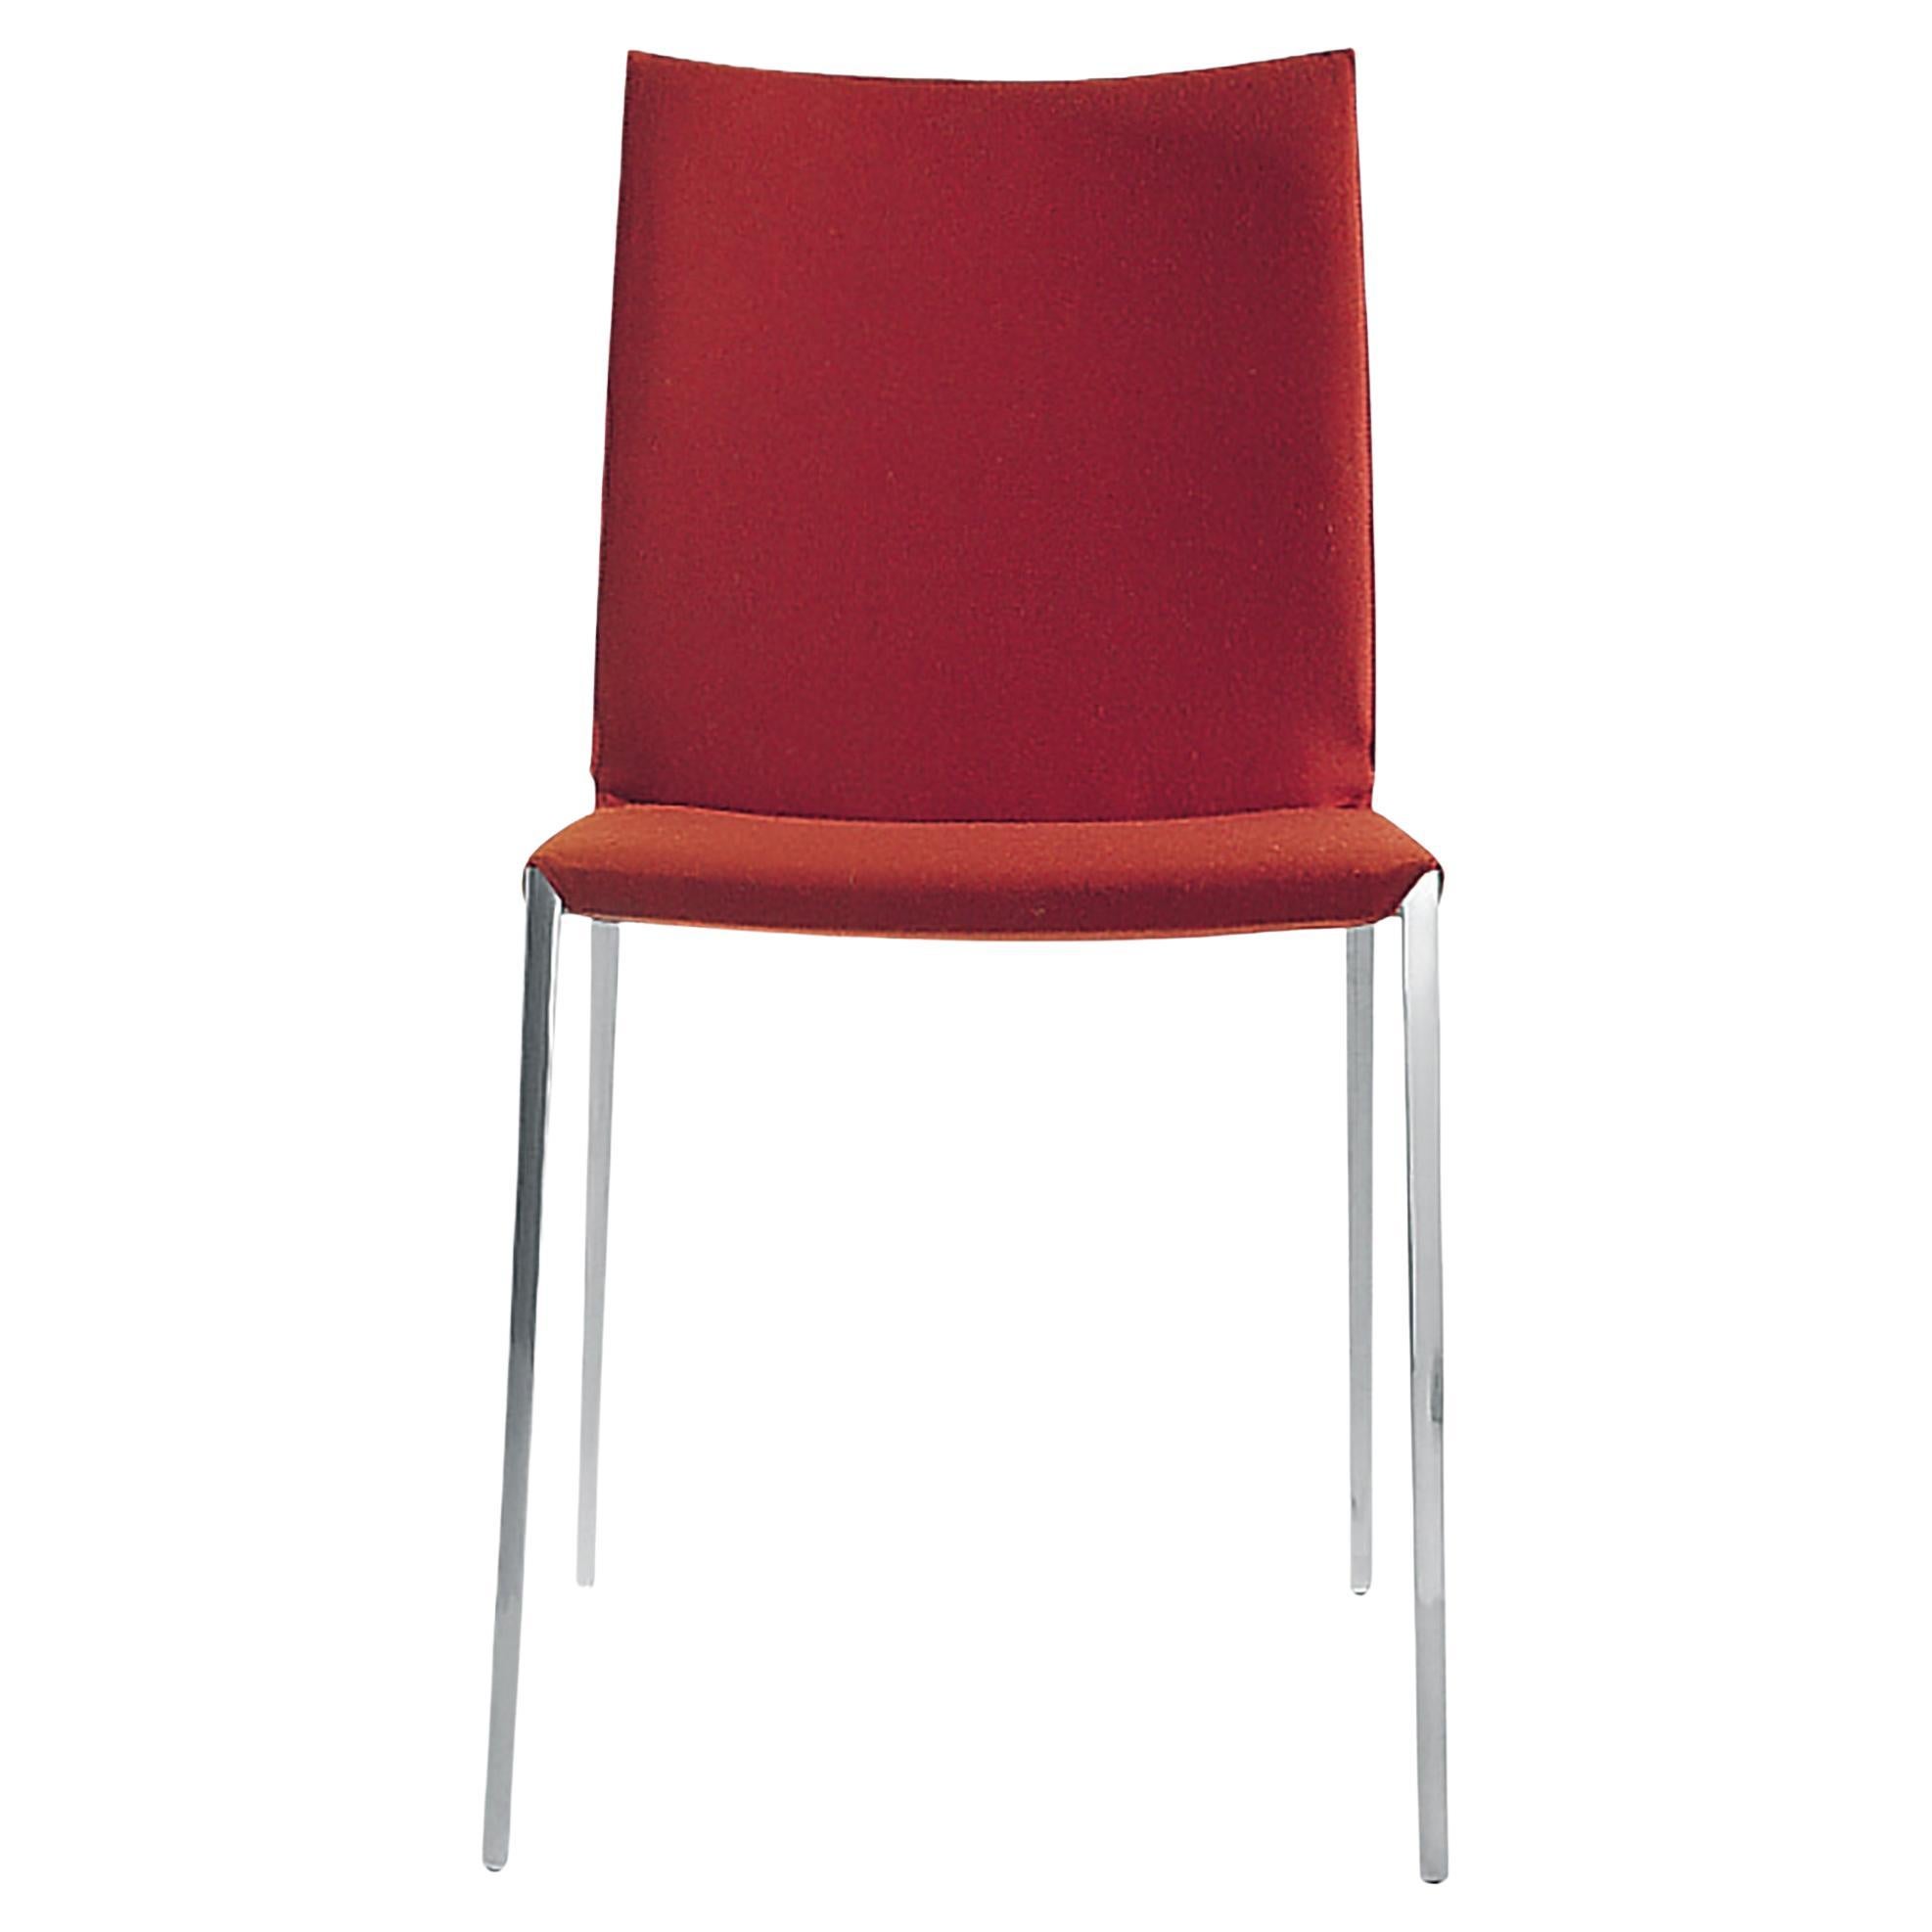 Zanotta Lia Chair in Red Fabric with Polished Aluminum Frame by Roberto Barbieri